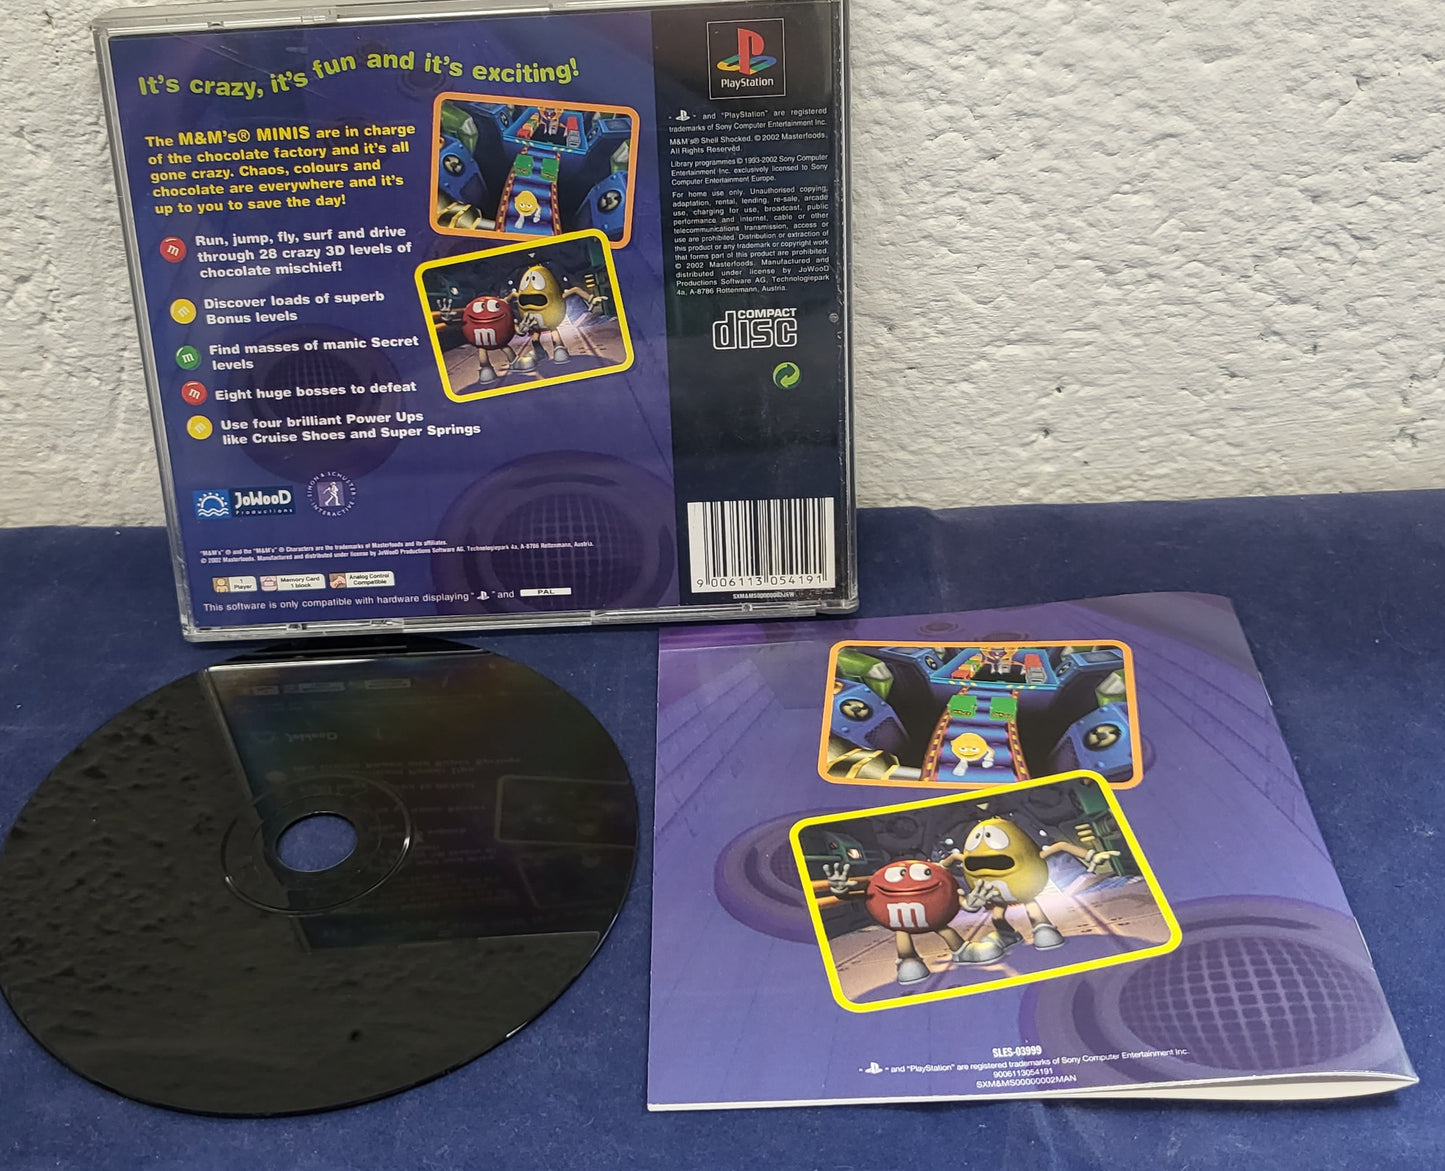 M&M's Shell Shocked Sony Playstation 1 (PS1) Game